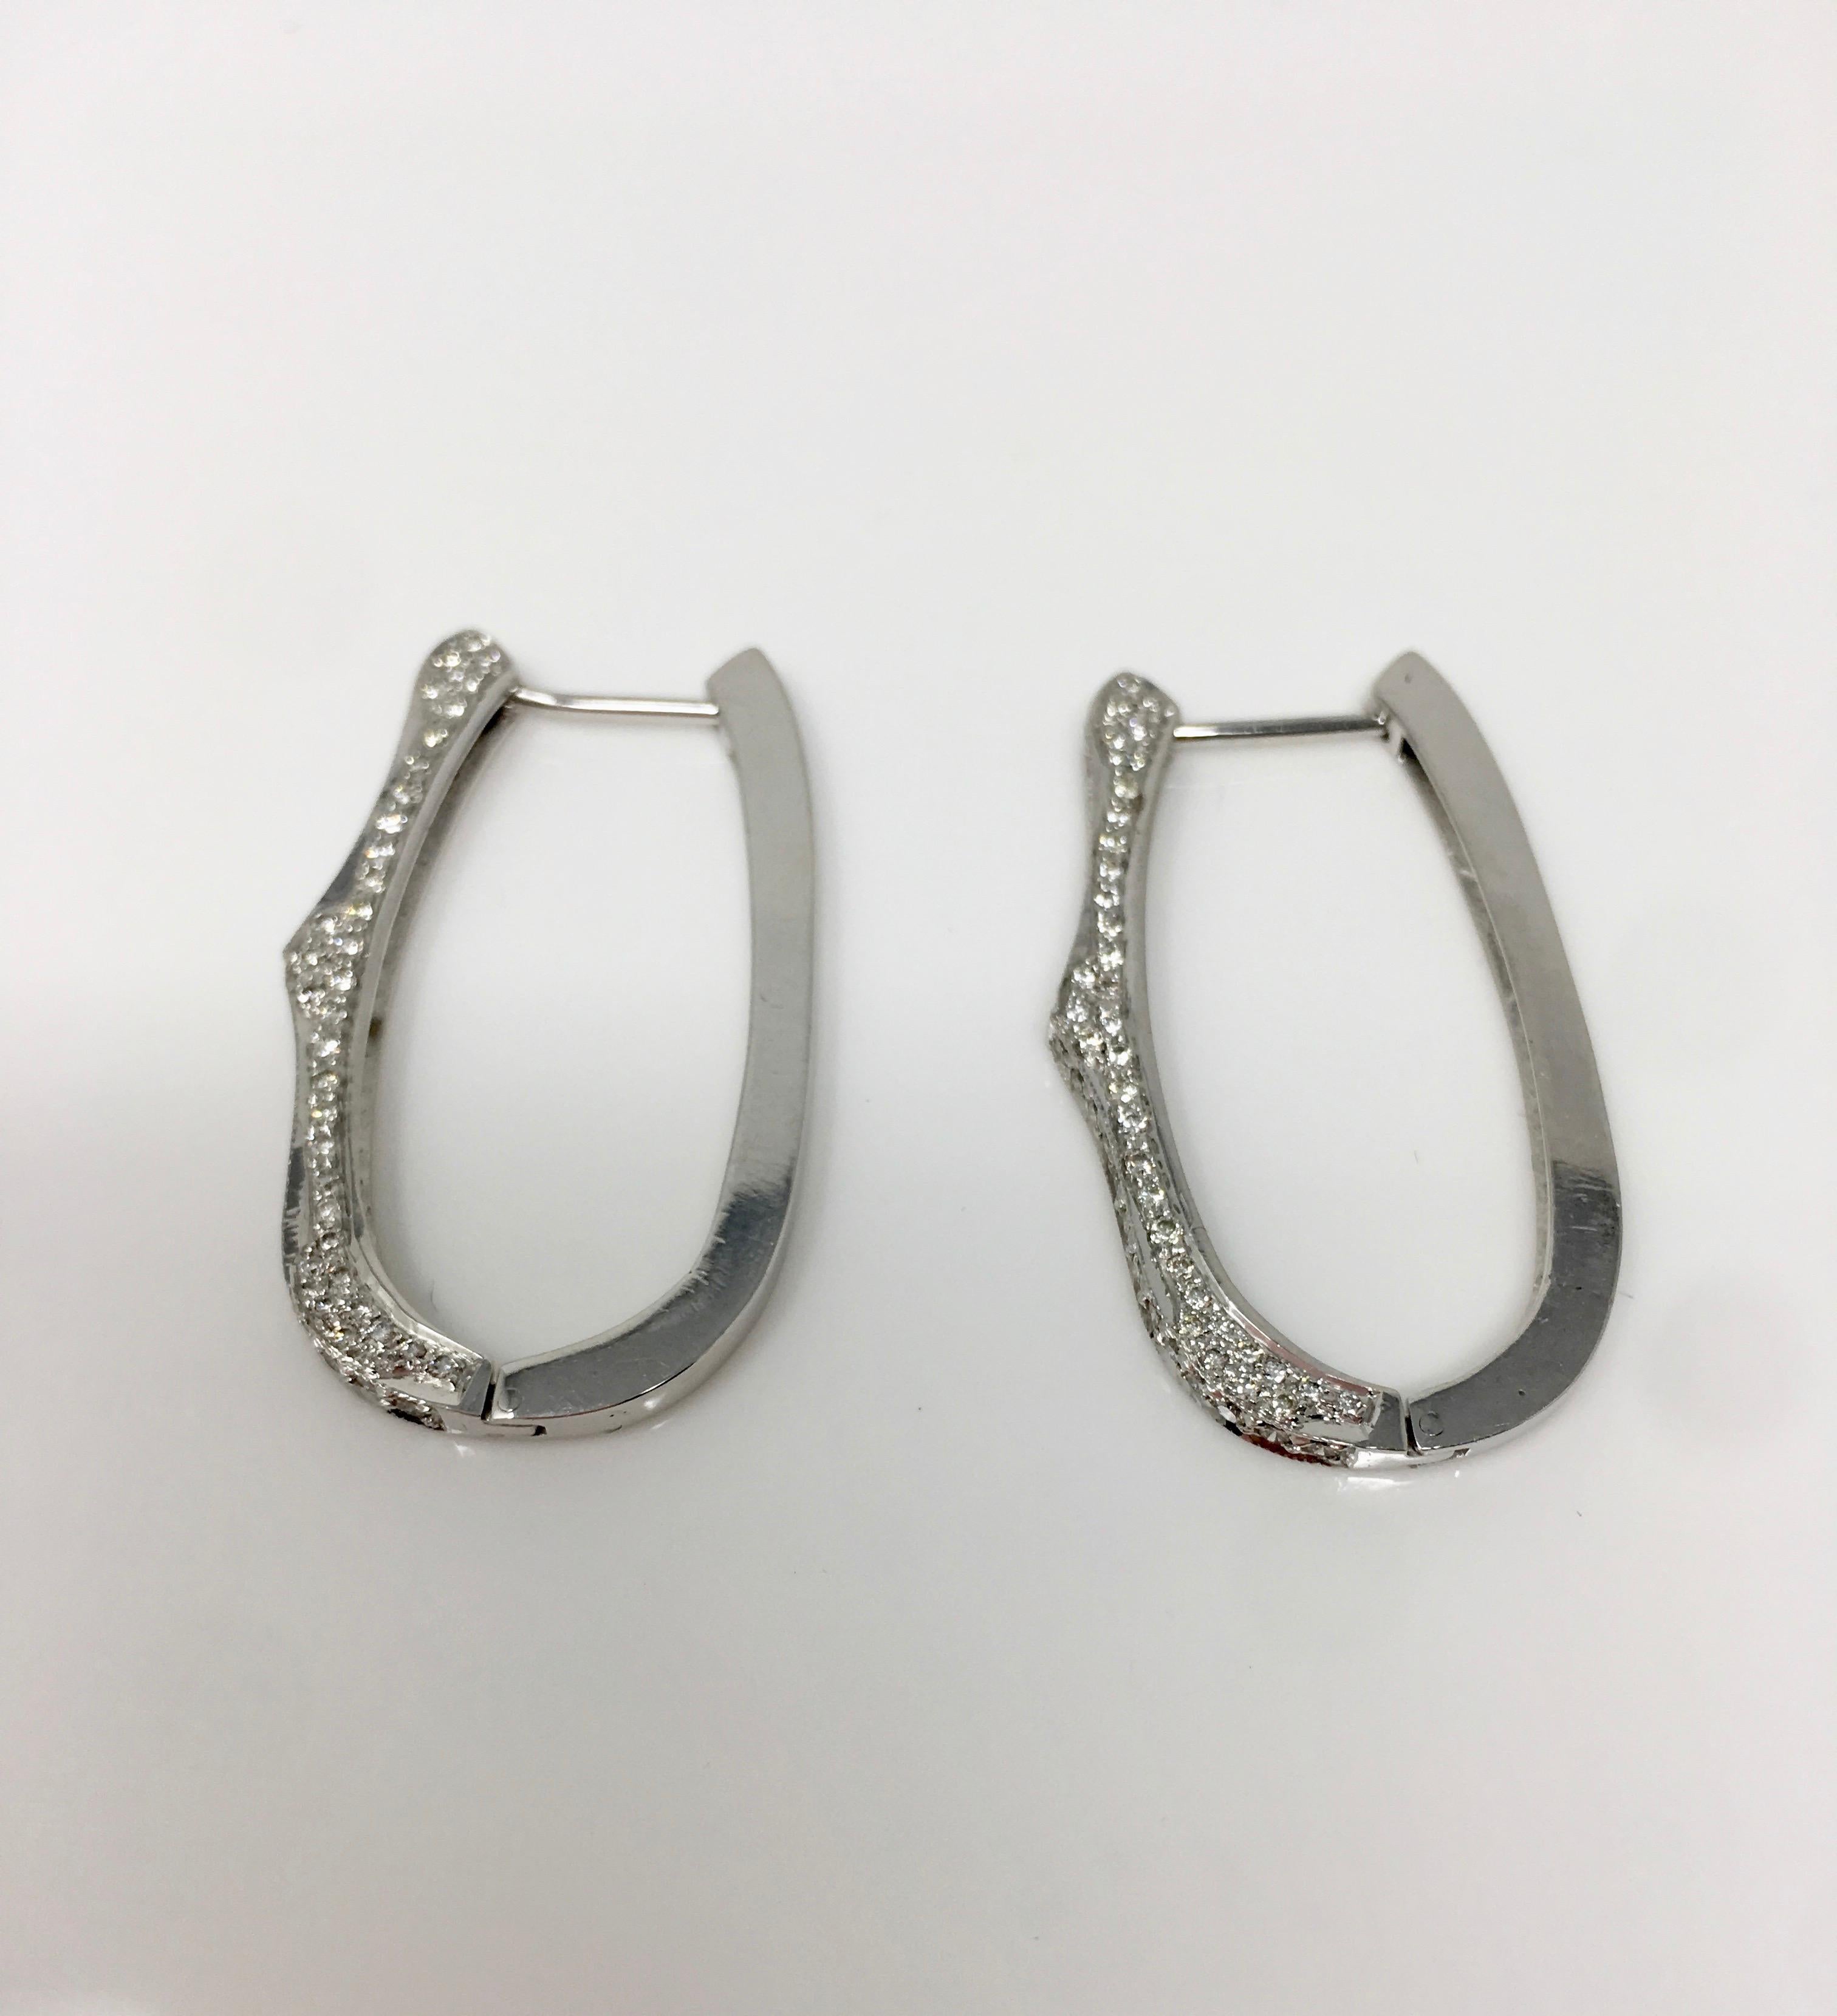 These elegant, beautiful and classy white round brilliant diamond hoop earrings are beautifully hand made by Moguldiam Inc. The total diamond weight is 1.34 carat and has GH color and VS clarity. The gold weight is 16.200 grams. The measurements